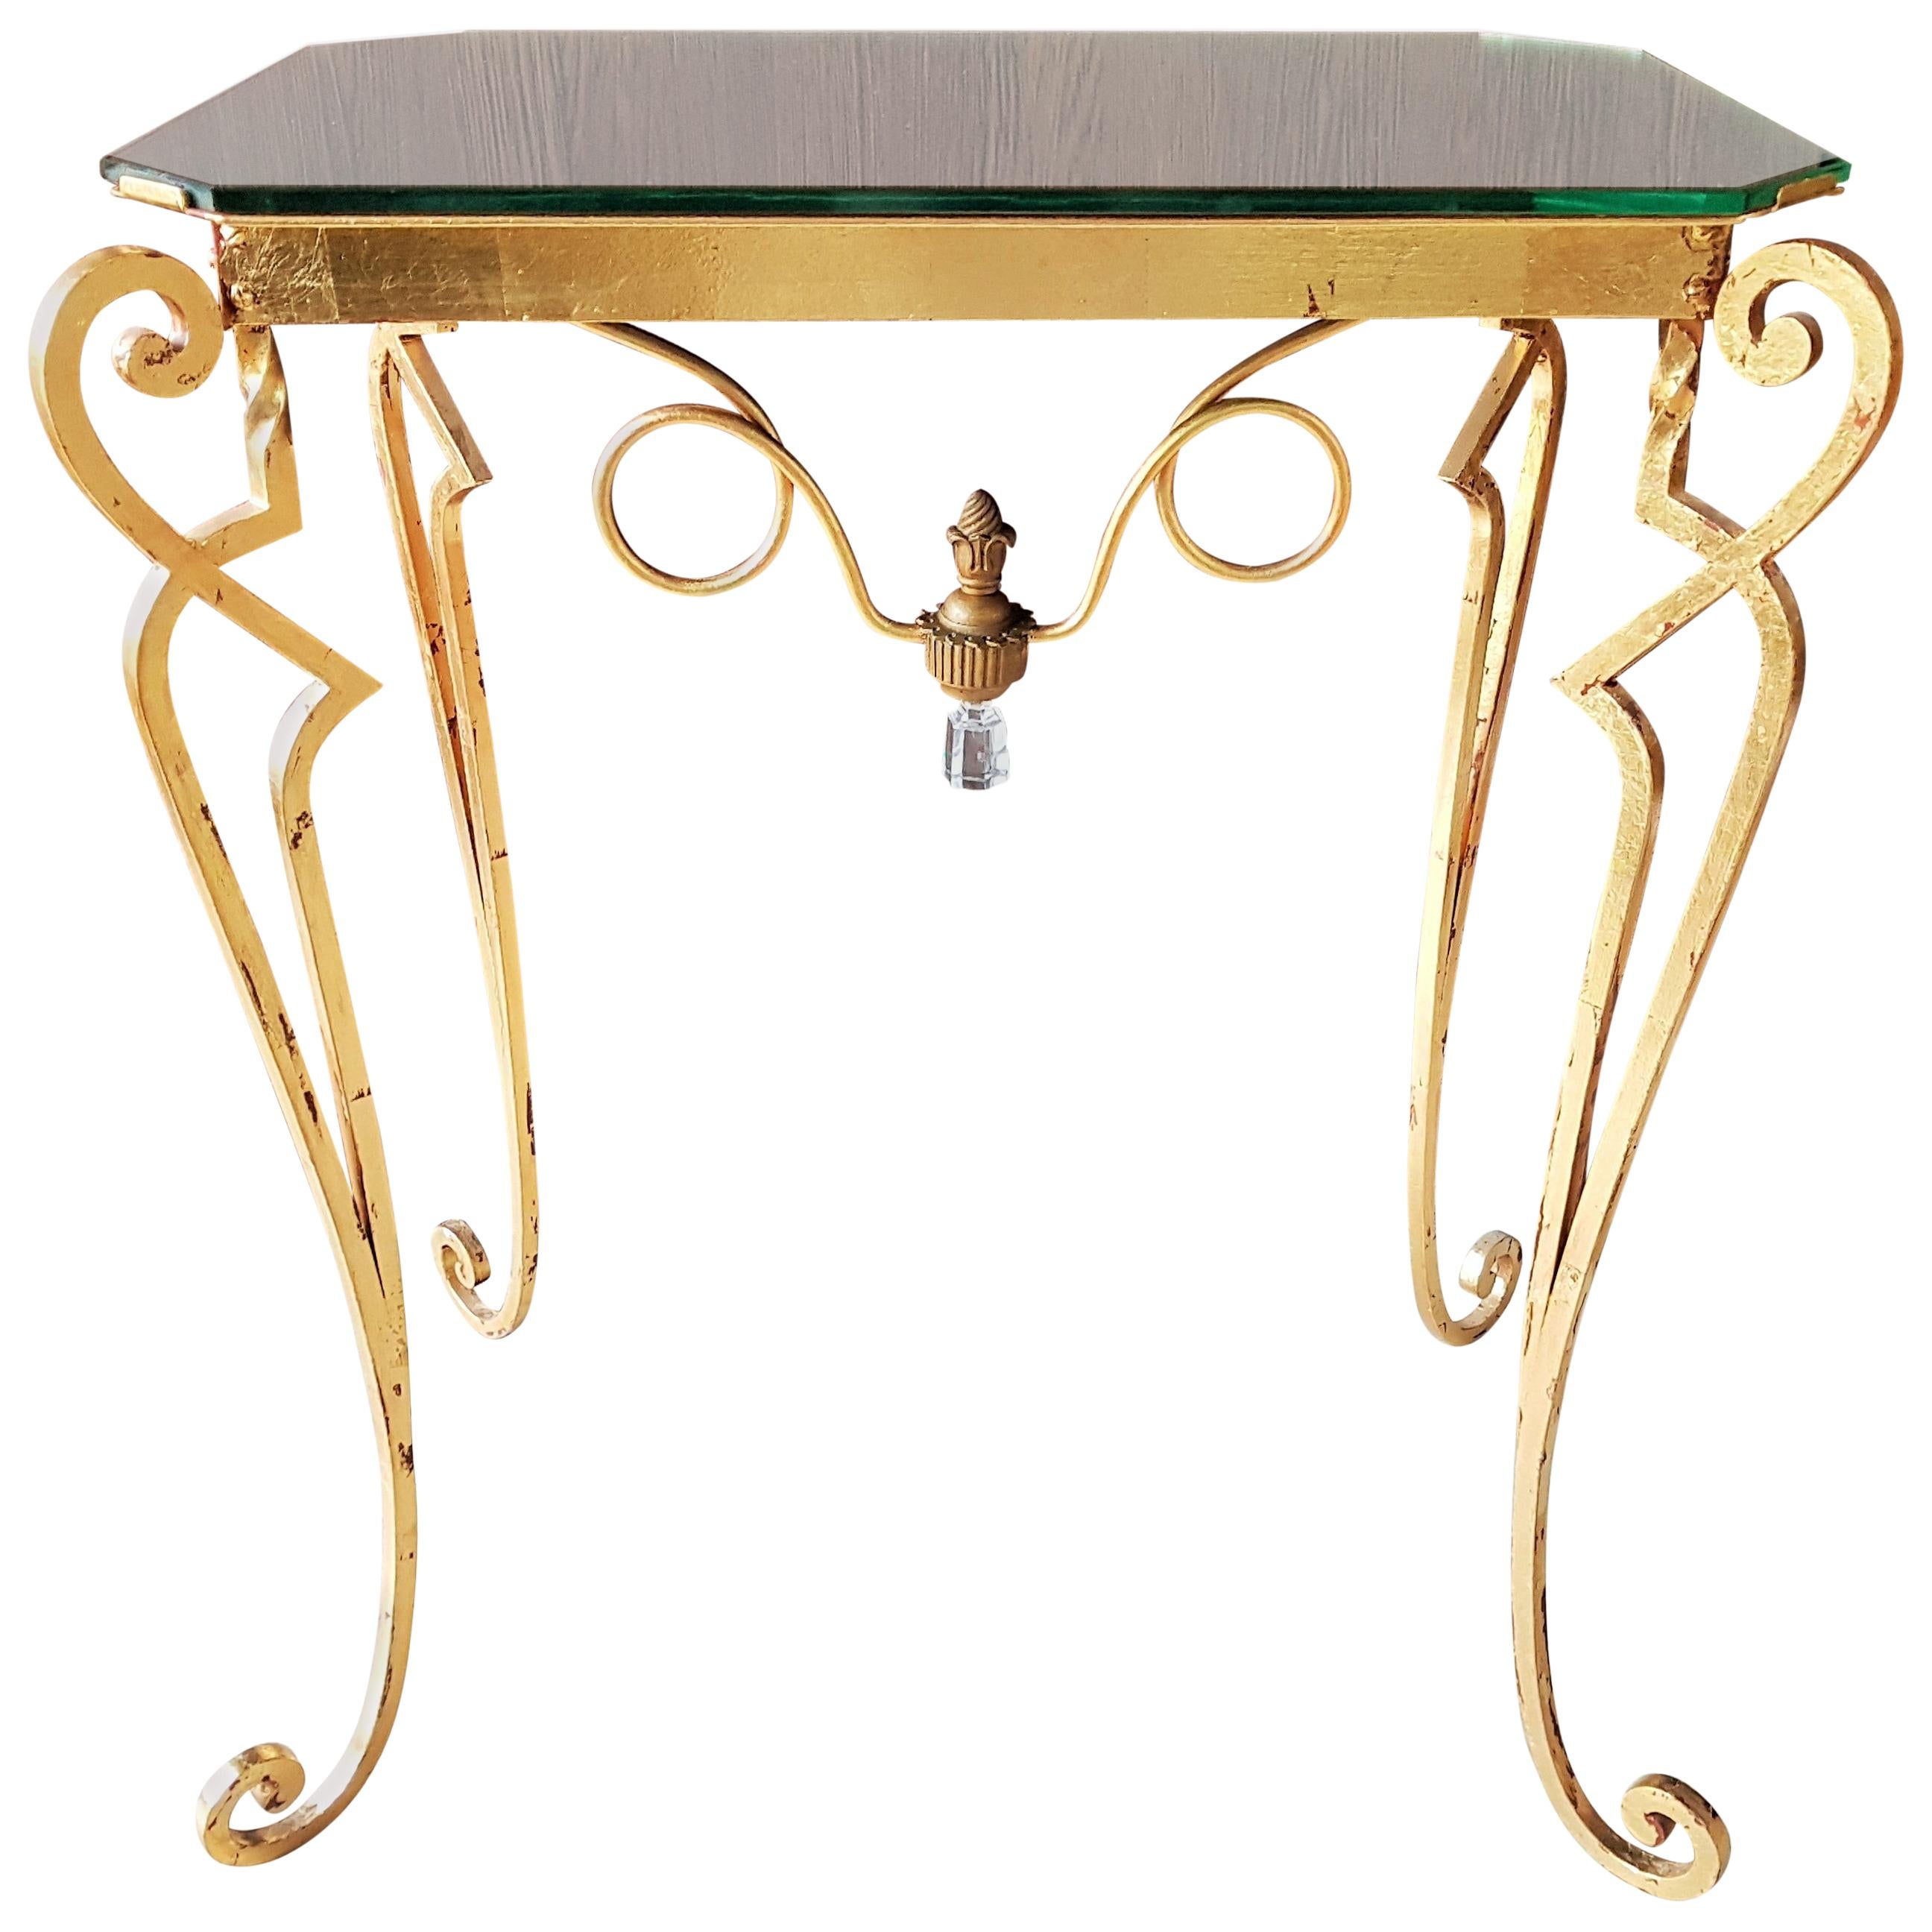 Wrought Iron Art Deco Console Side Table Attributed to Drouet, France, 1940